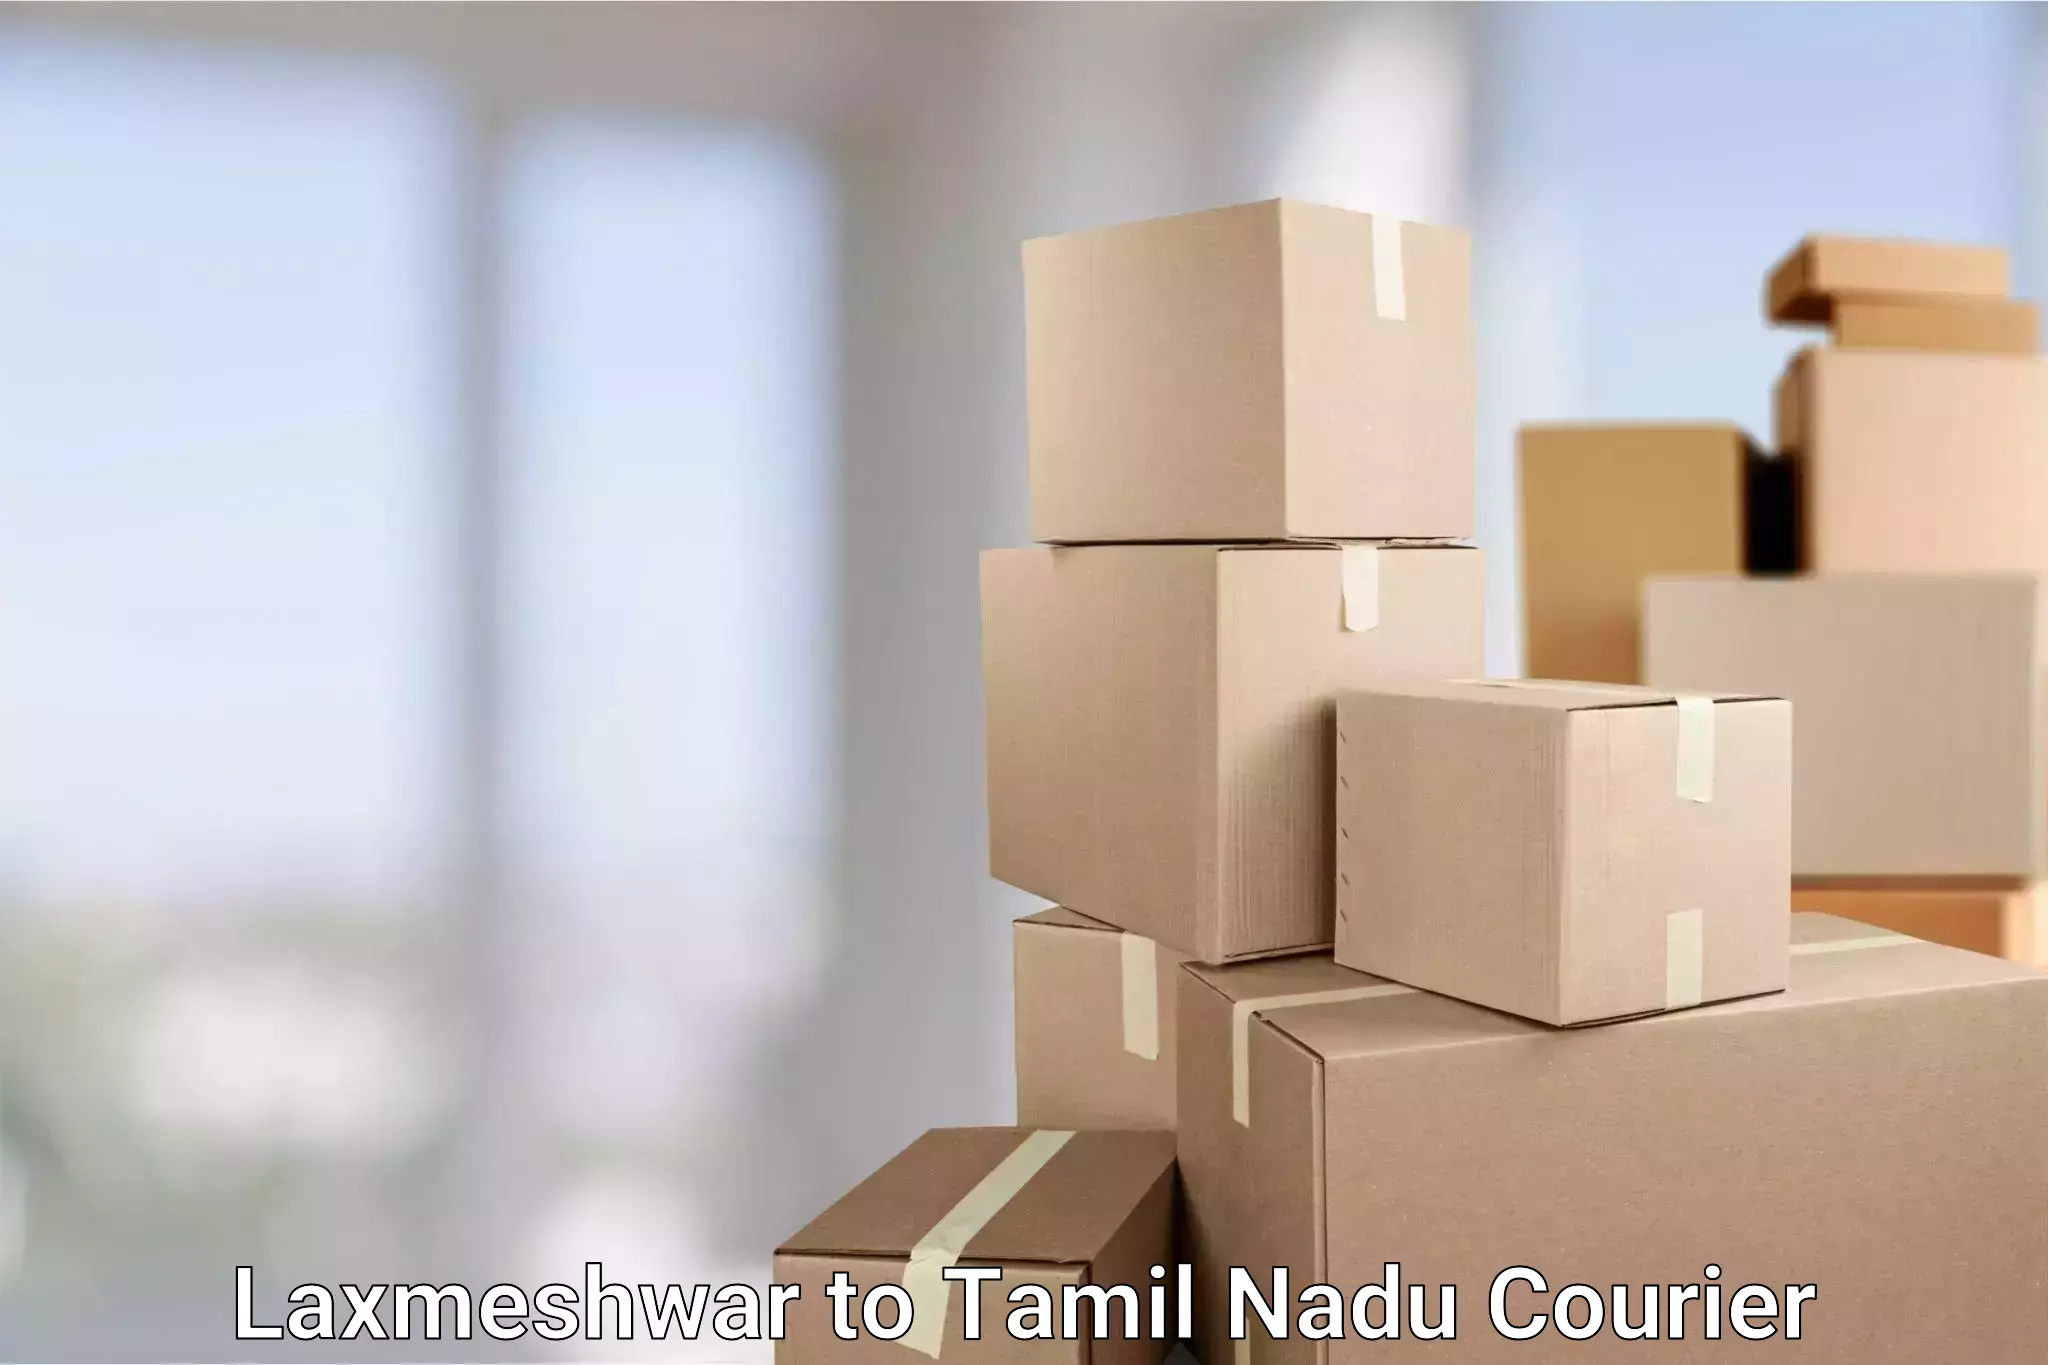 Reliable courier service Laxmeshwar to Thanjavur